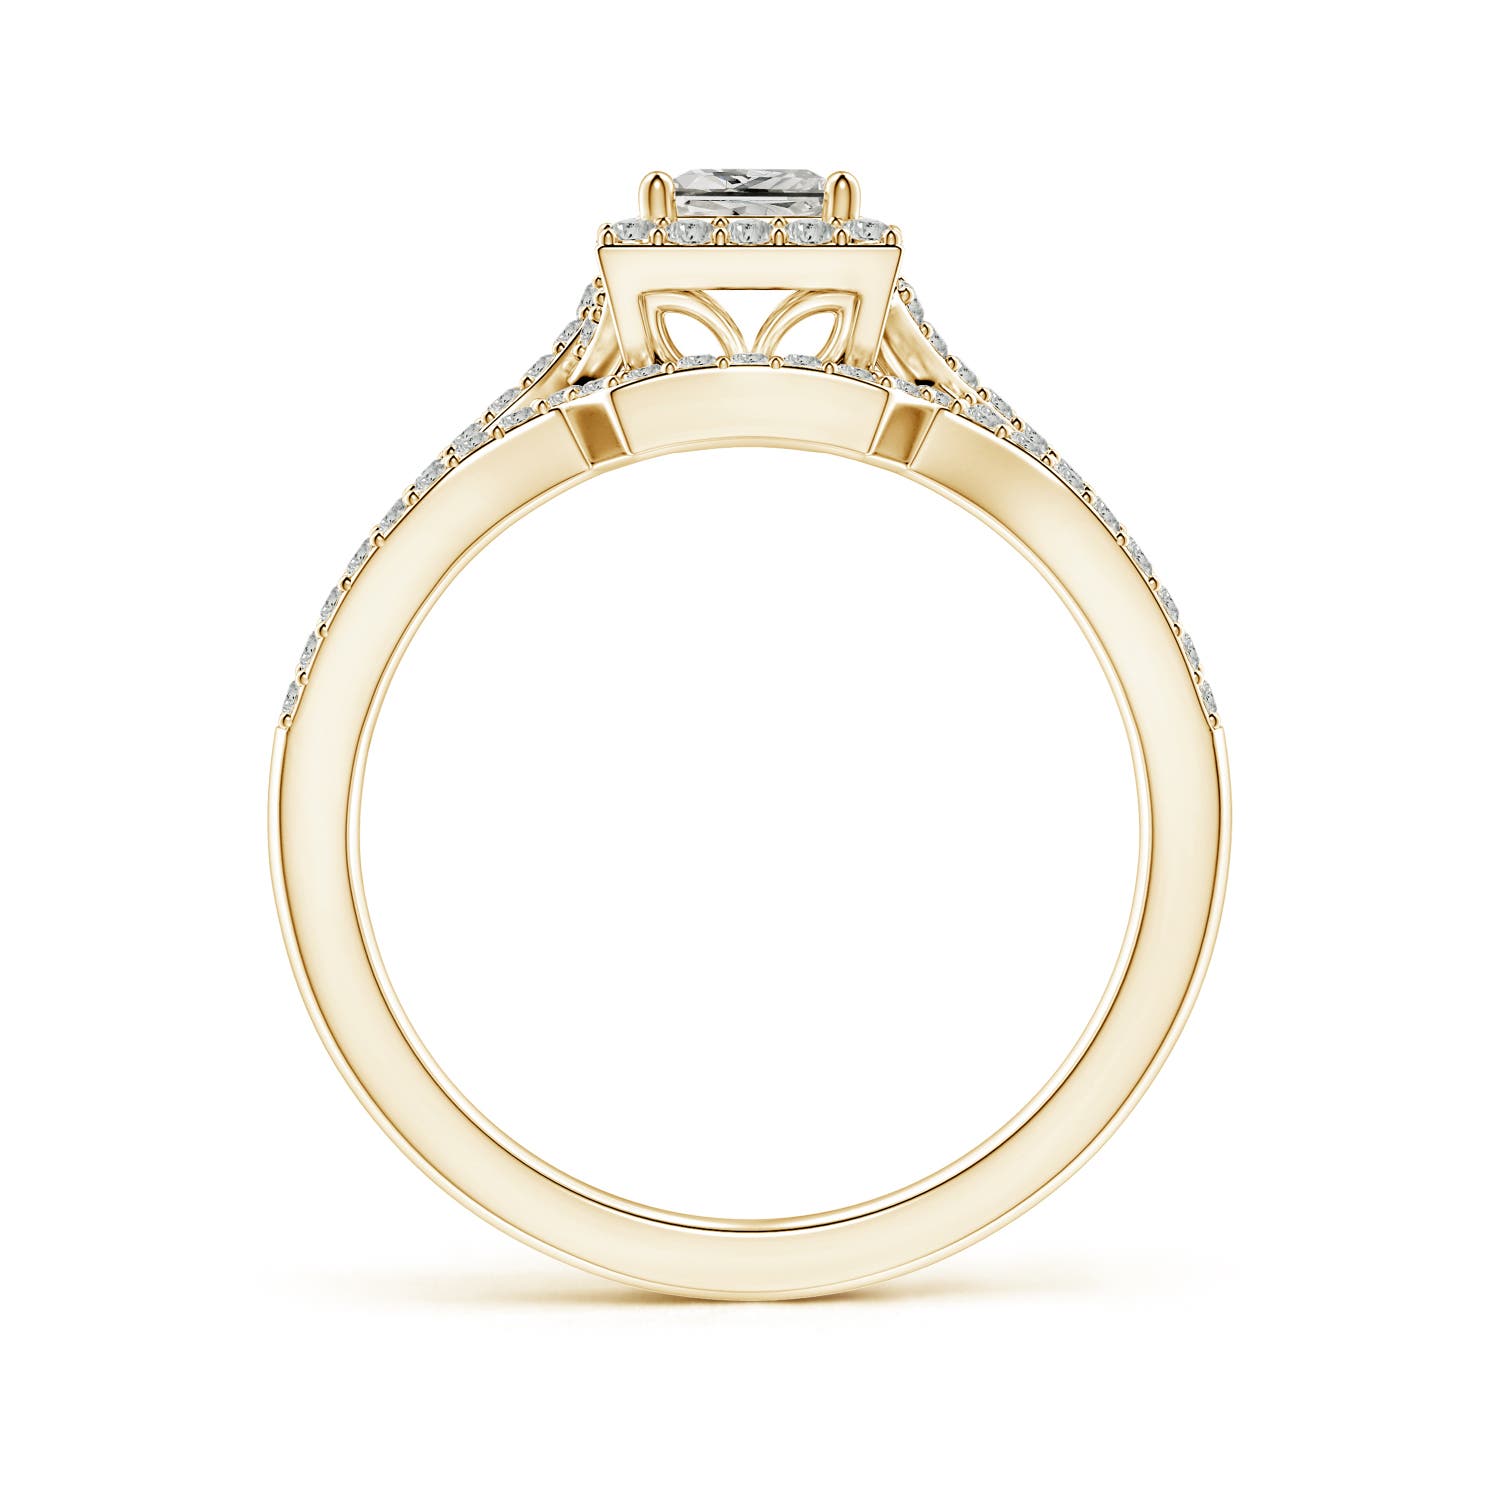 K, I3 / 1.17 CT / 14 KT Yellow Gold